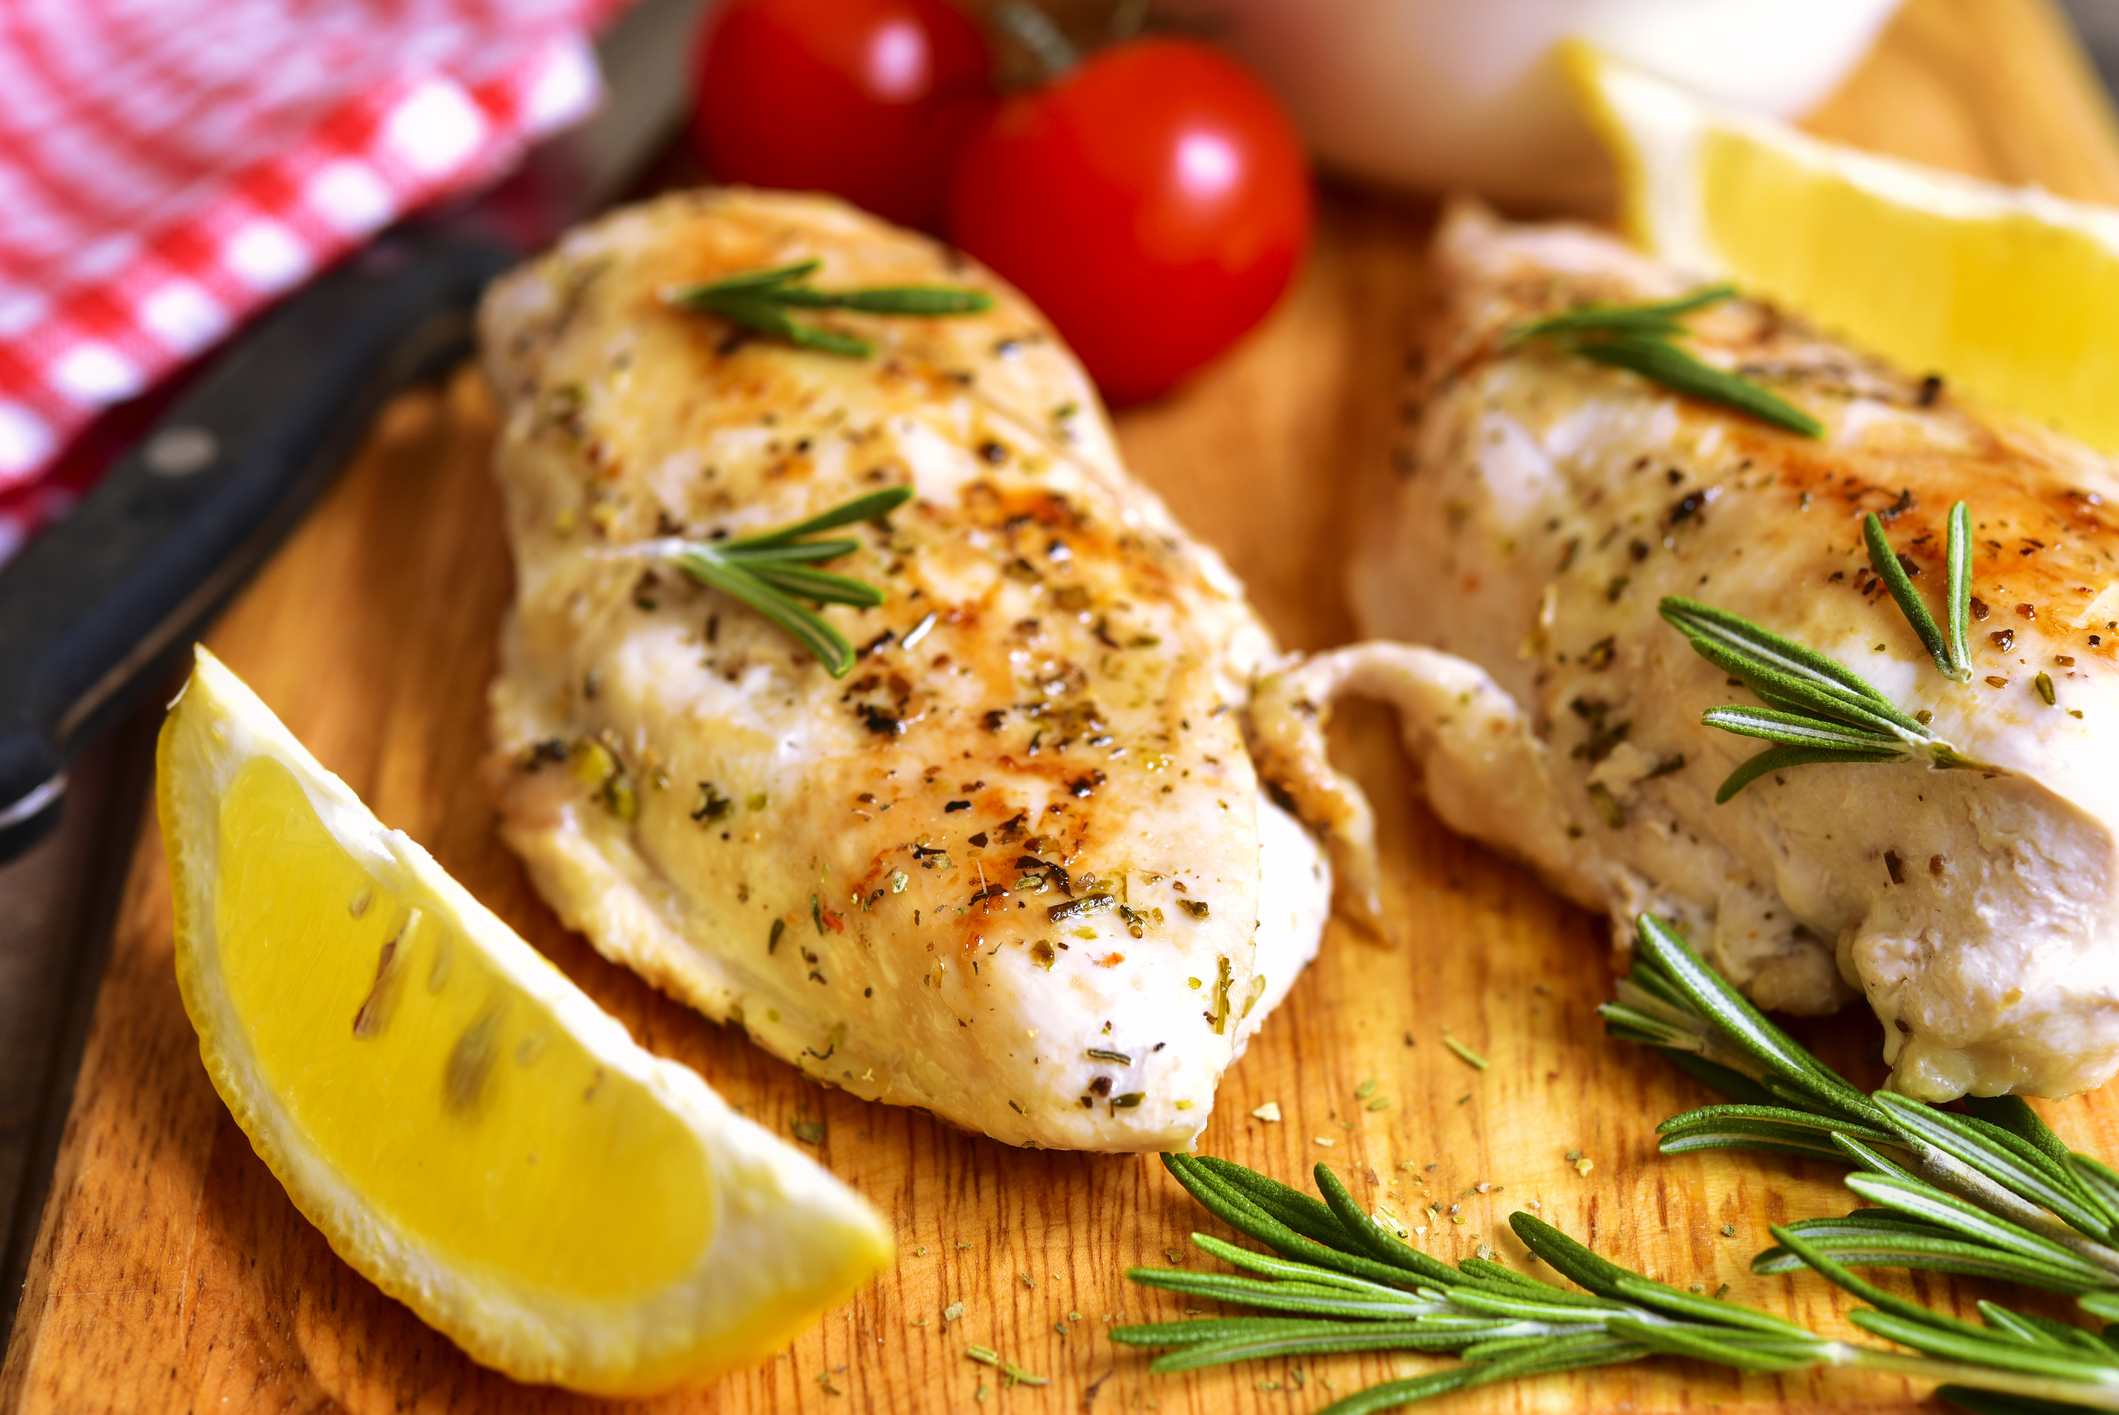 Easy Recipe for Grilled Chicken With Rosemary, Garlic and Lemon